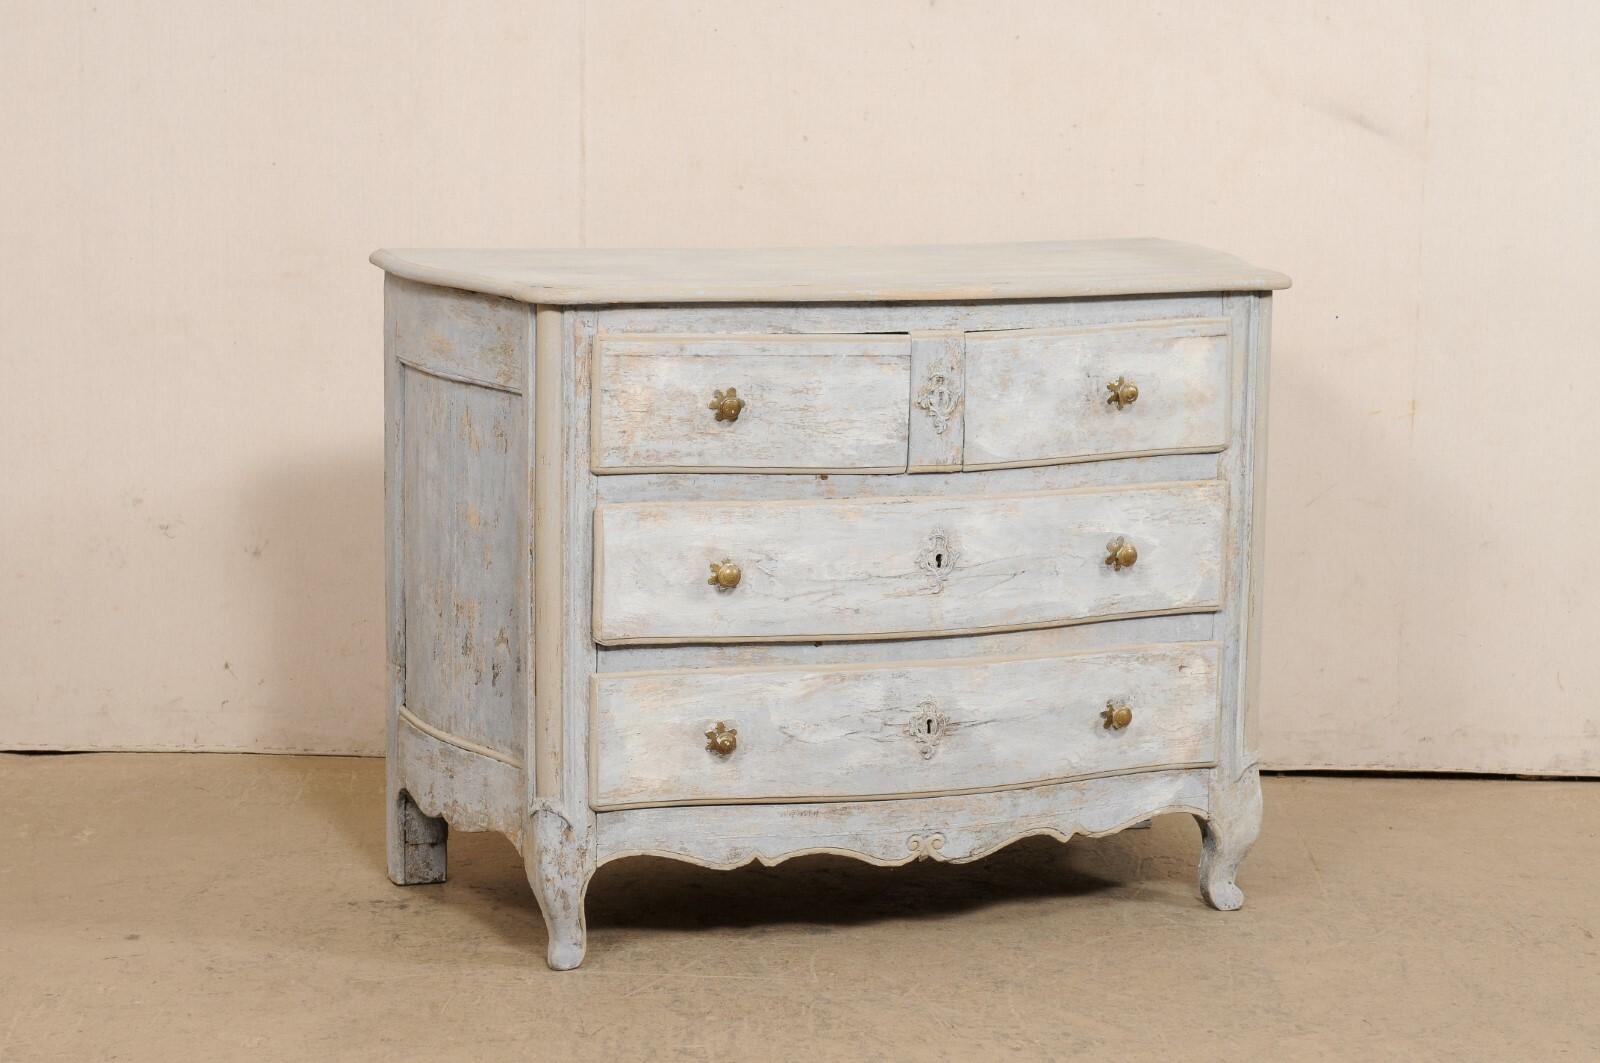 A French Louis XV carved and painted wood commode, with subtle serpentine shaped body, from the 18th century. This antique chest from France has a shapely top with serpentine front and softly outwardly scalloped sides. The body of the case carries